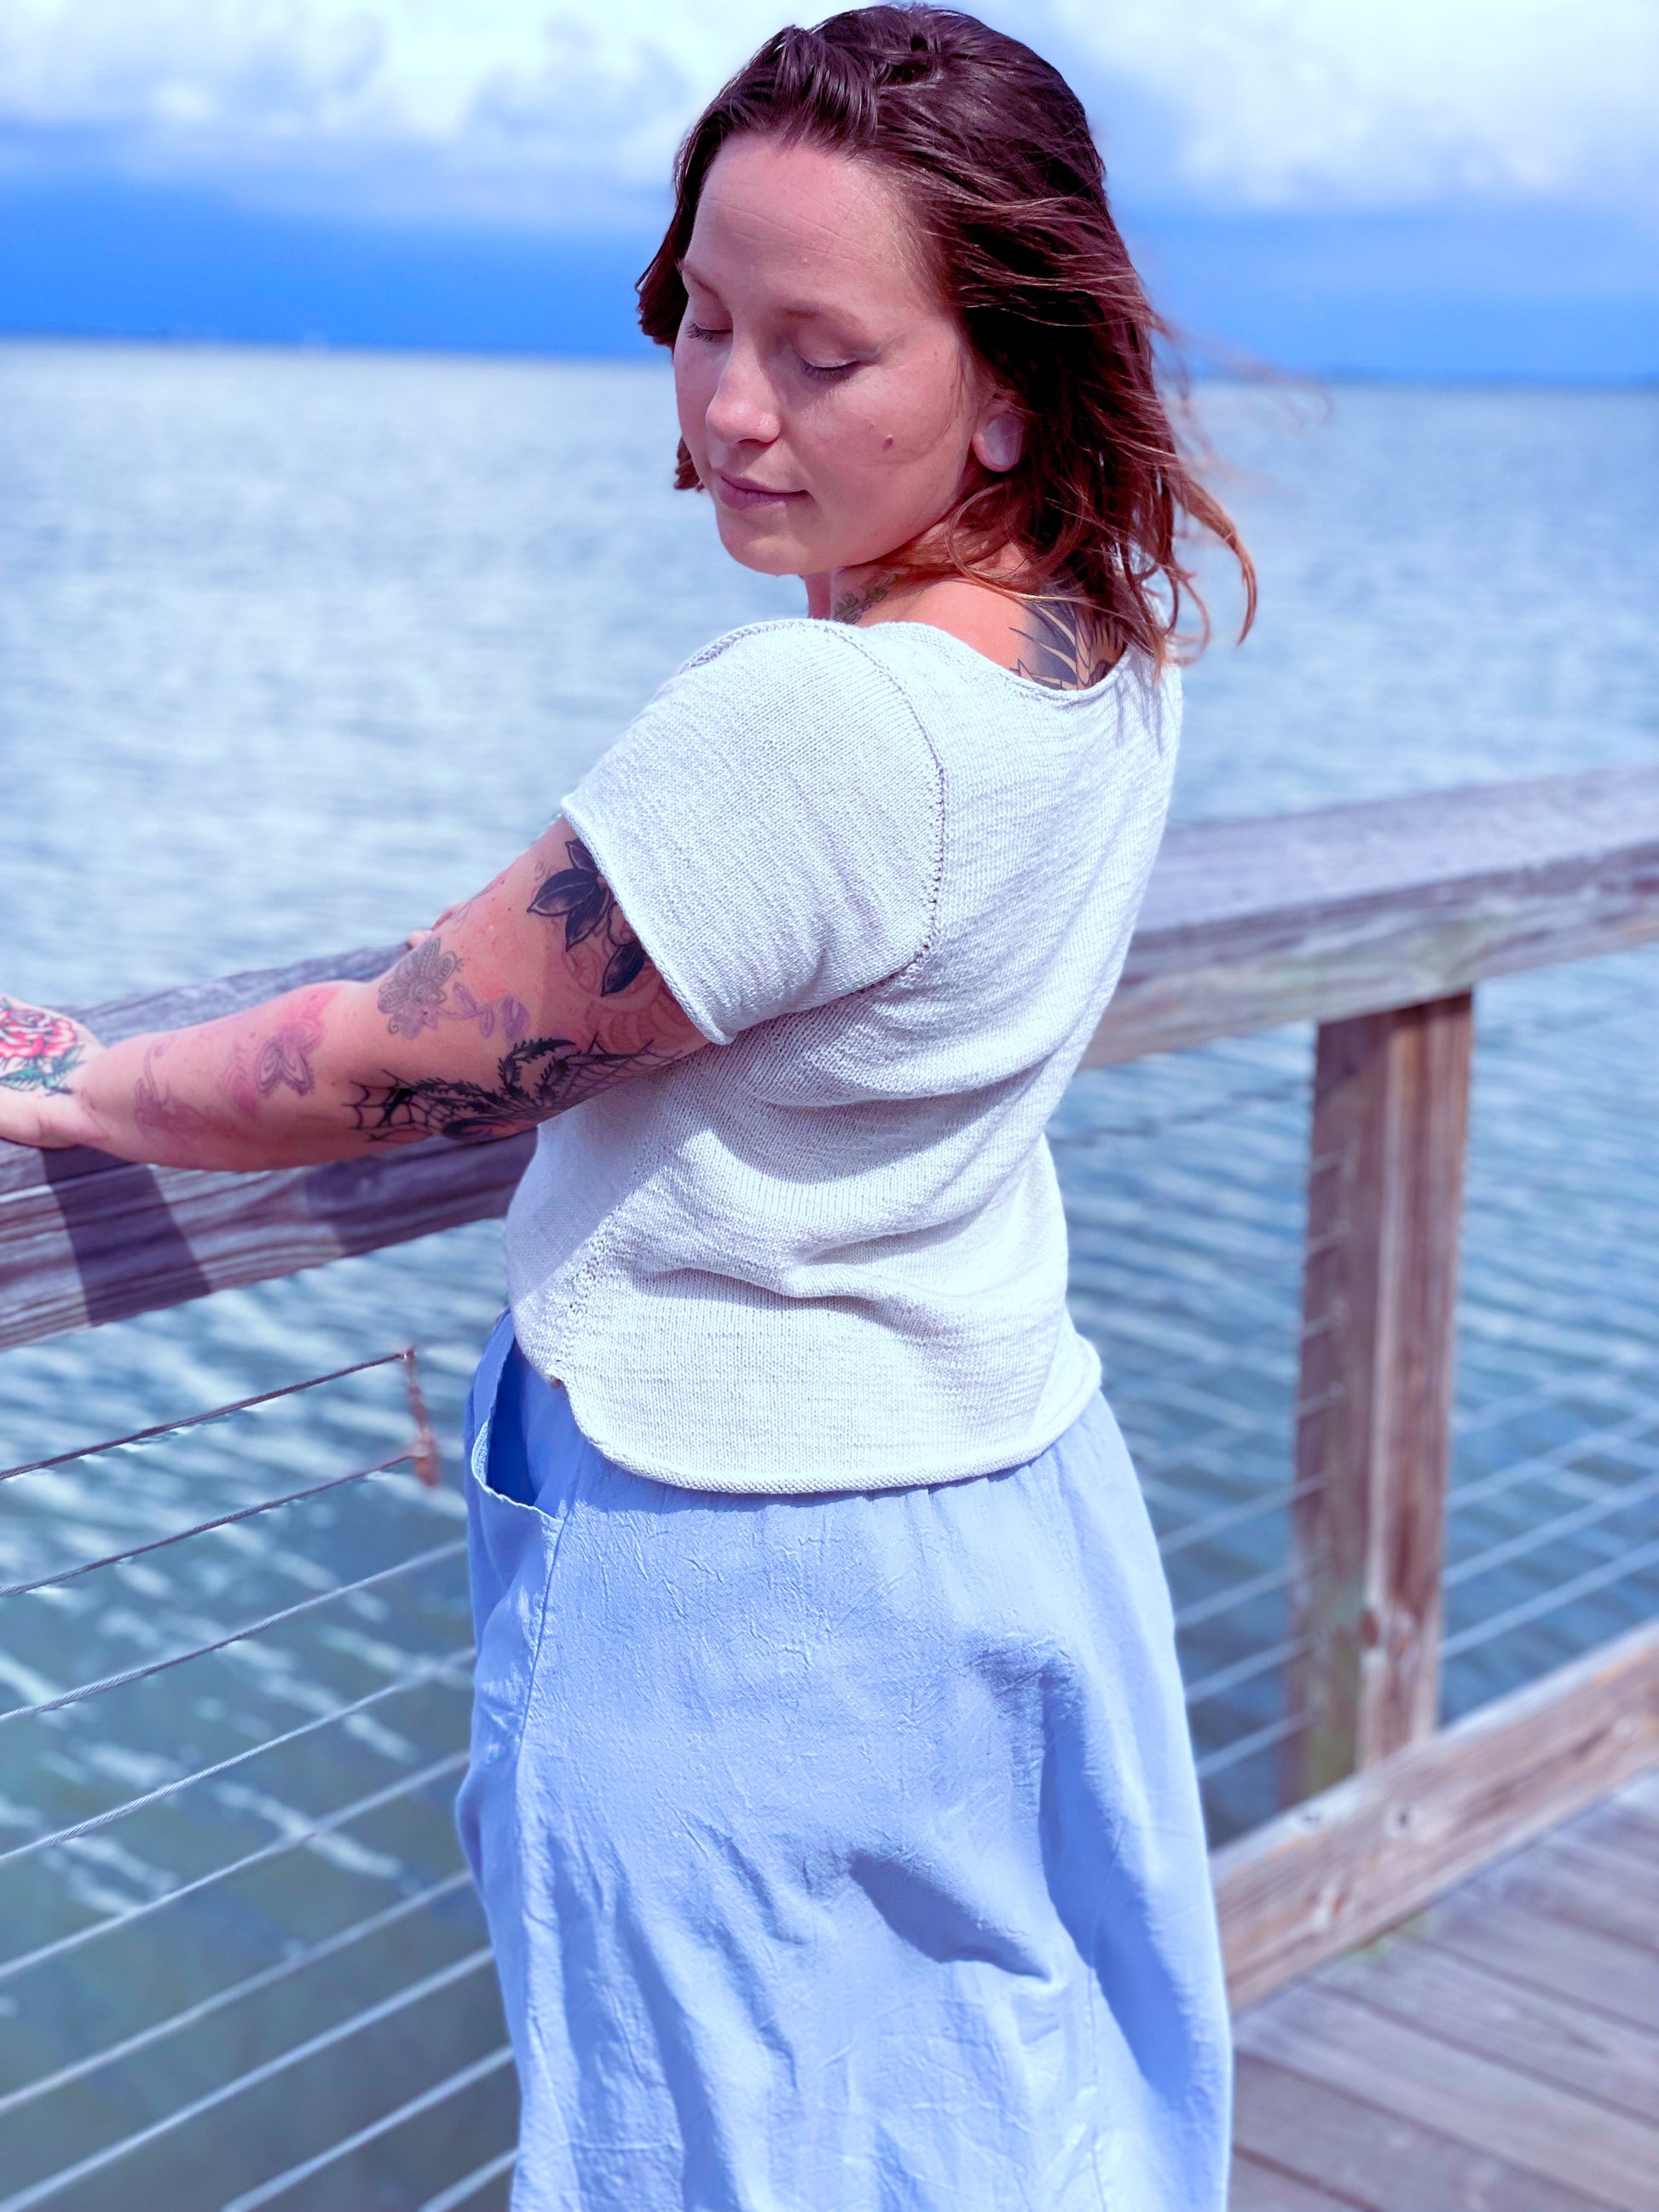 Bess stands on a bridge, her back to the camera. She wears a white, hand knit tee with a light blue skirt.